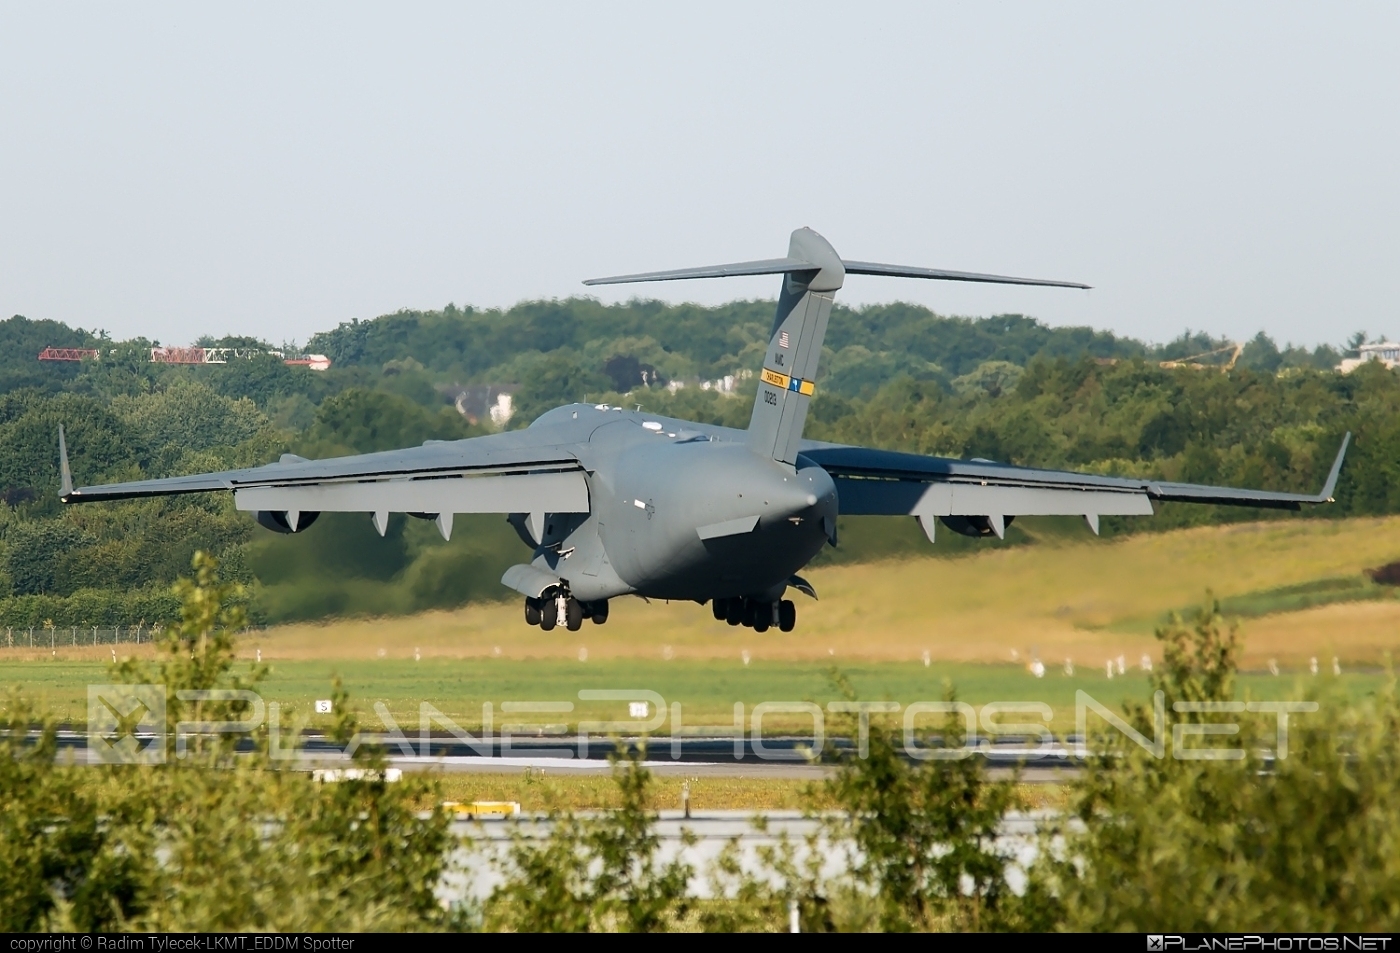 Boeing C-17A Globemaster III - 10-0213 operated by US Air Force (USAF) #boeing #c17 #c17globemaster #globemaster #globemasteriii #usaf #usairforce